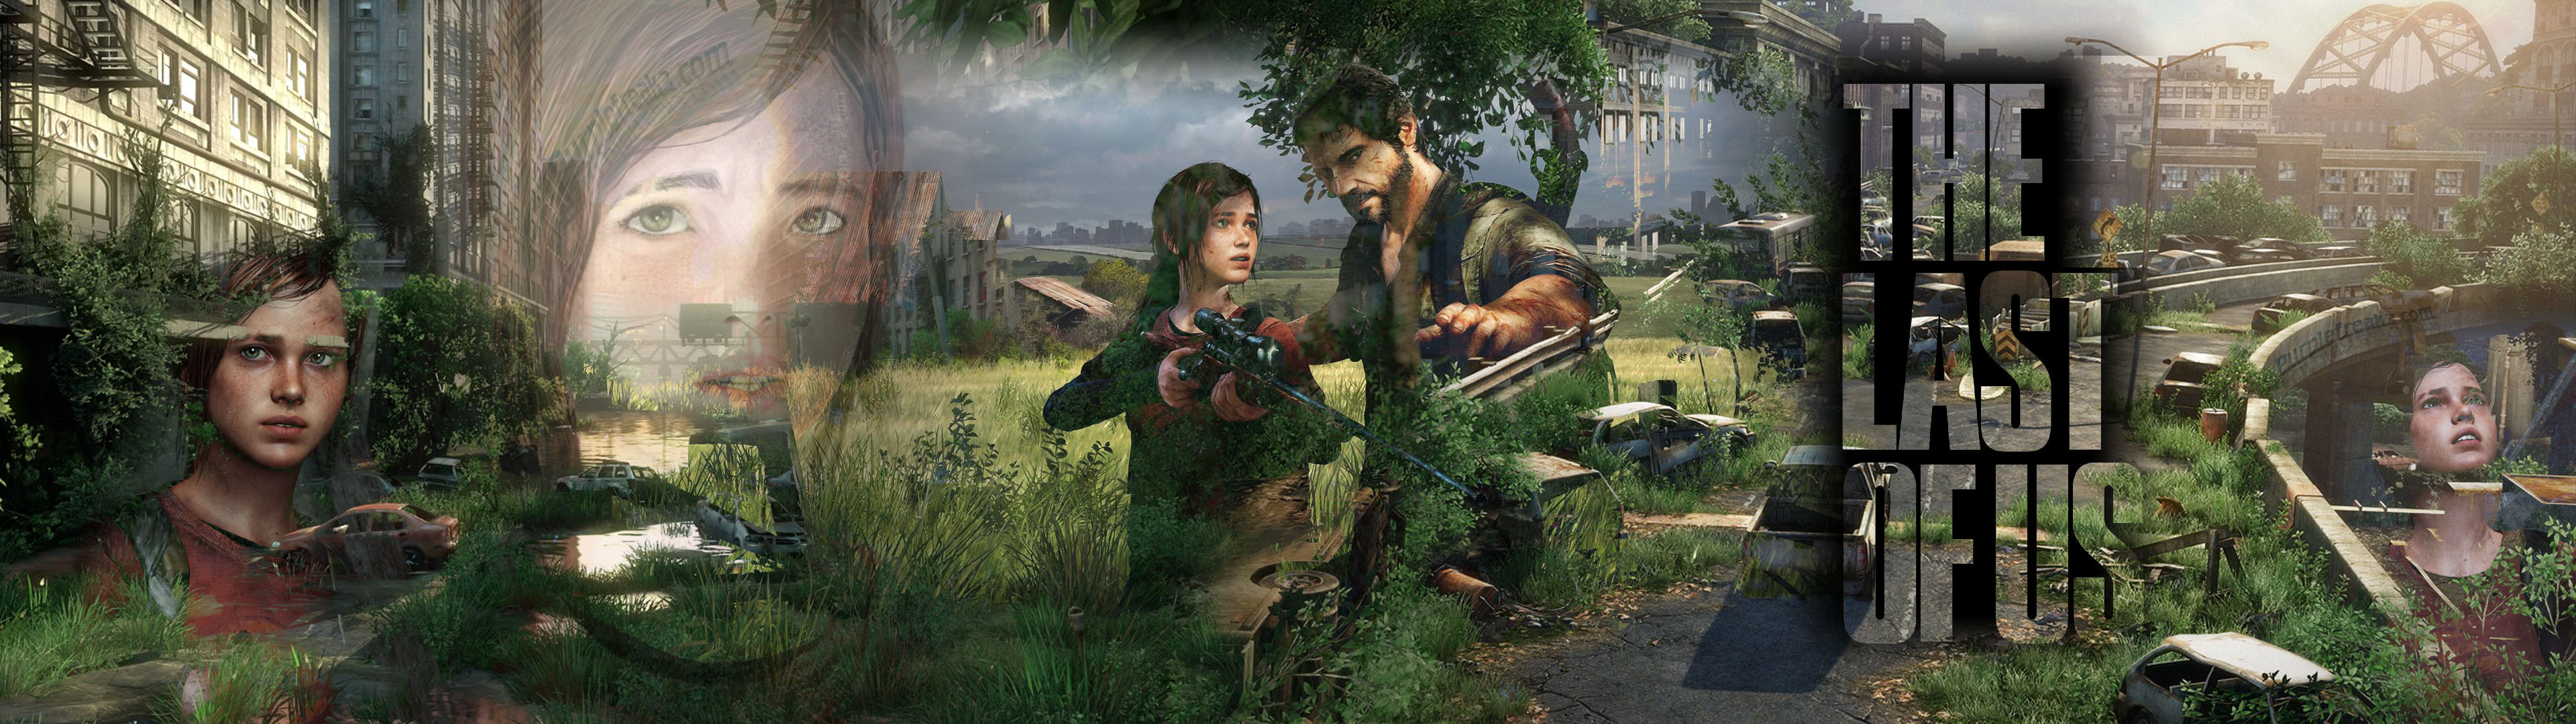 Last Of Us Es Out June 14th On The Playstation